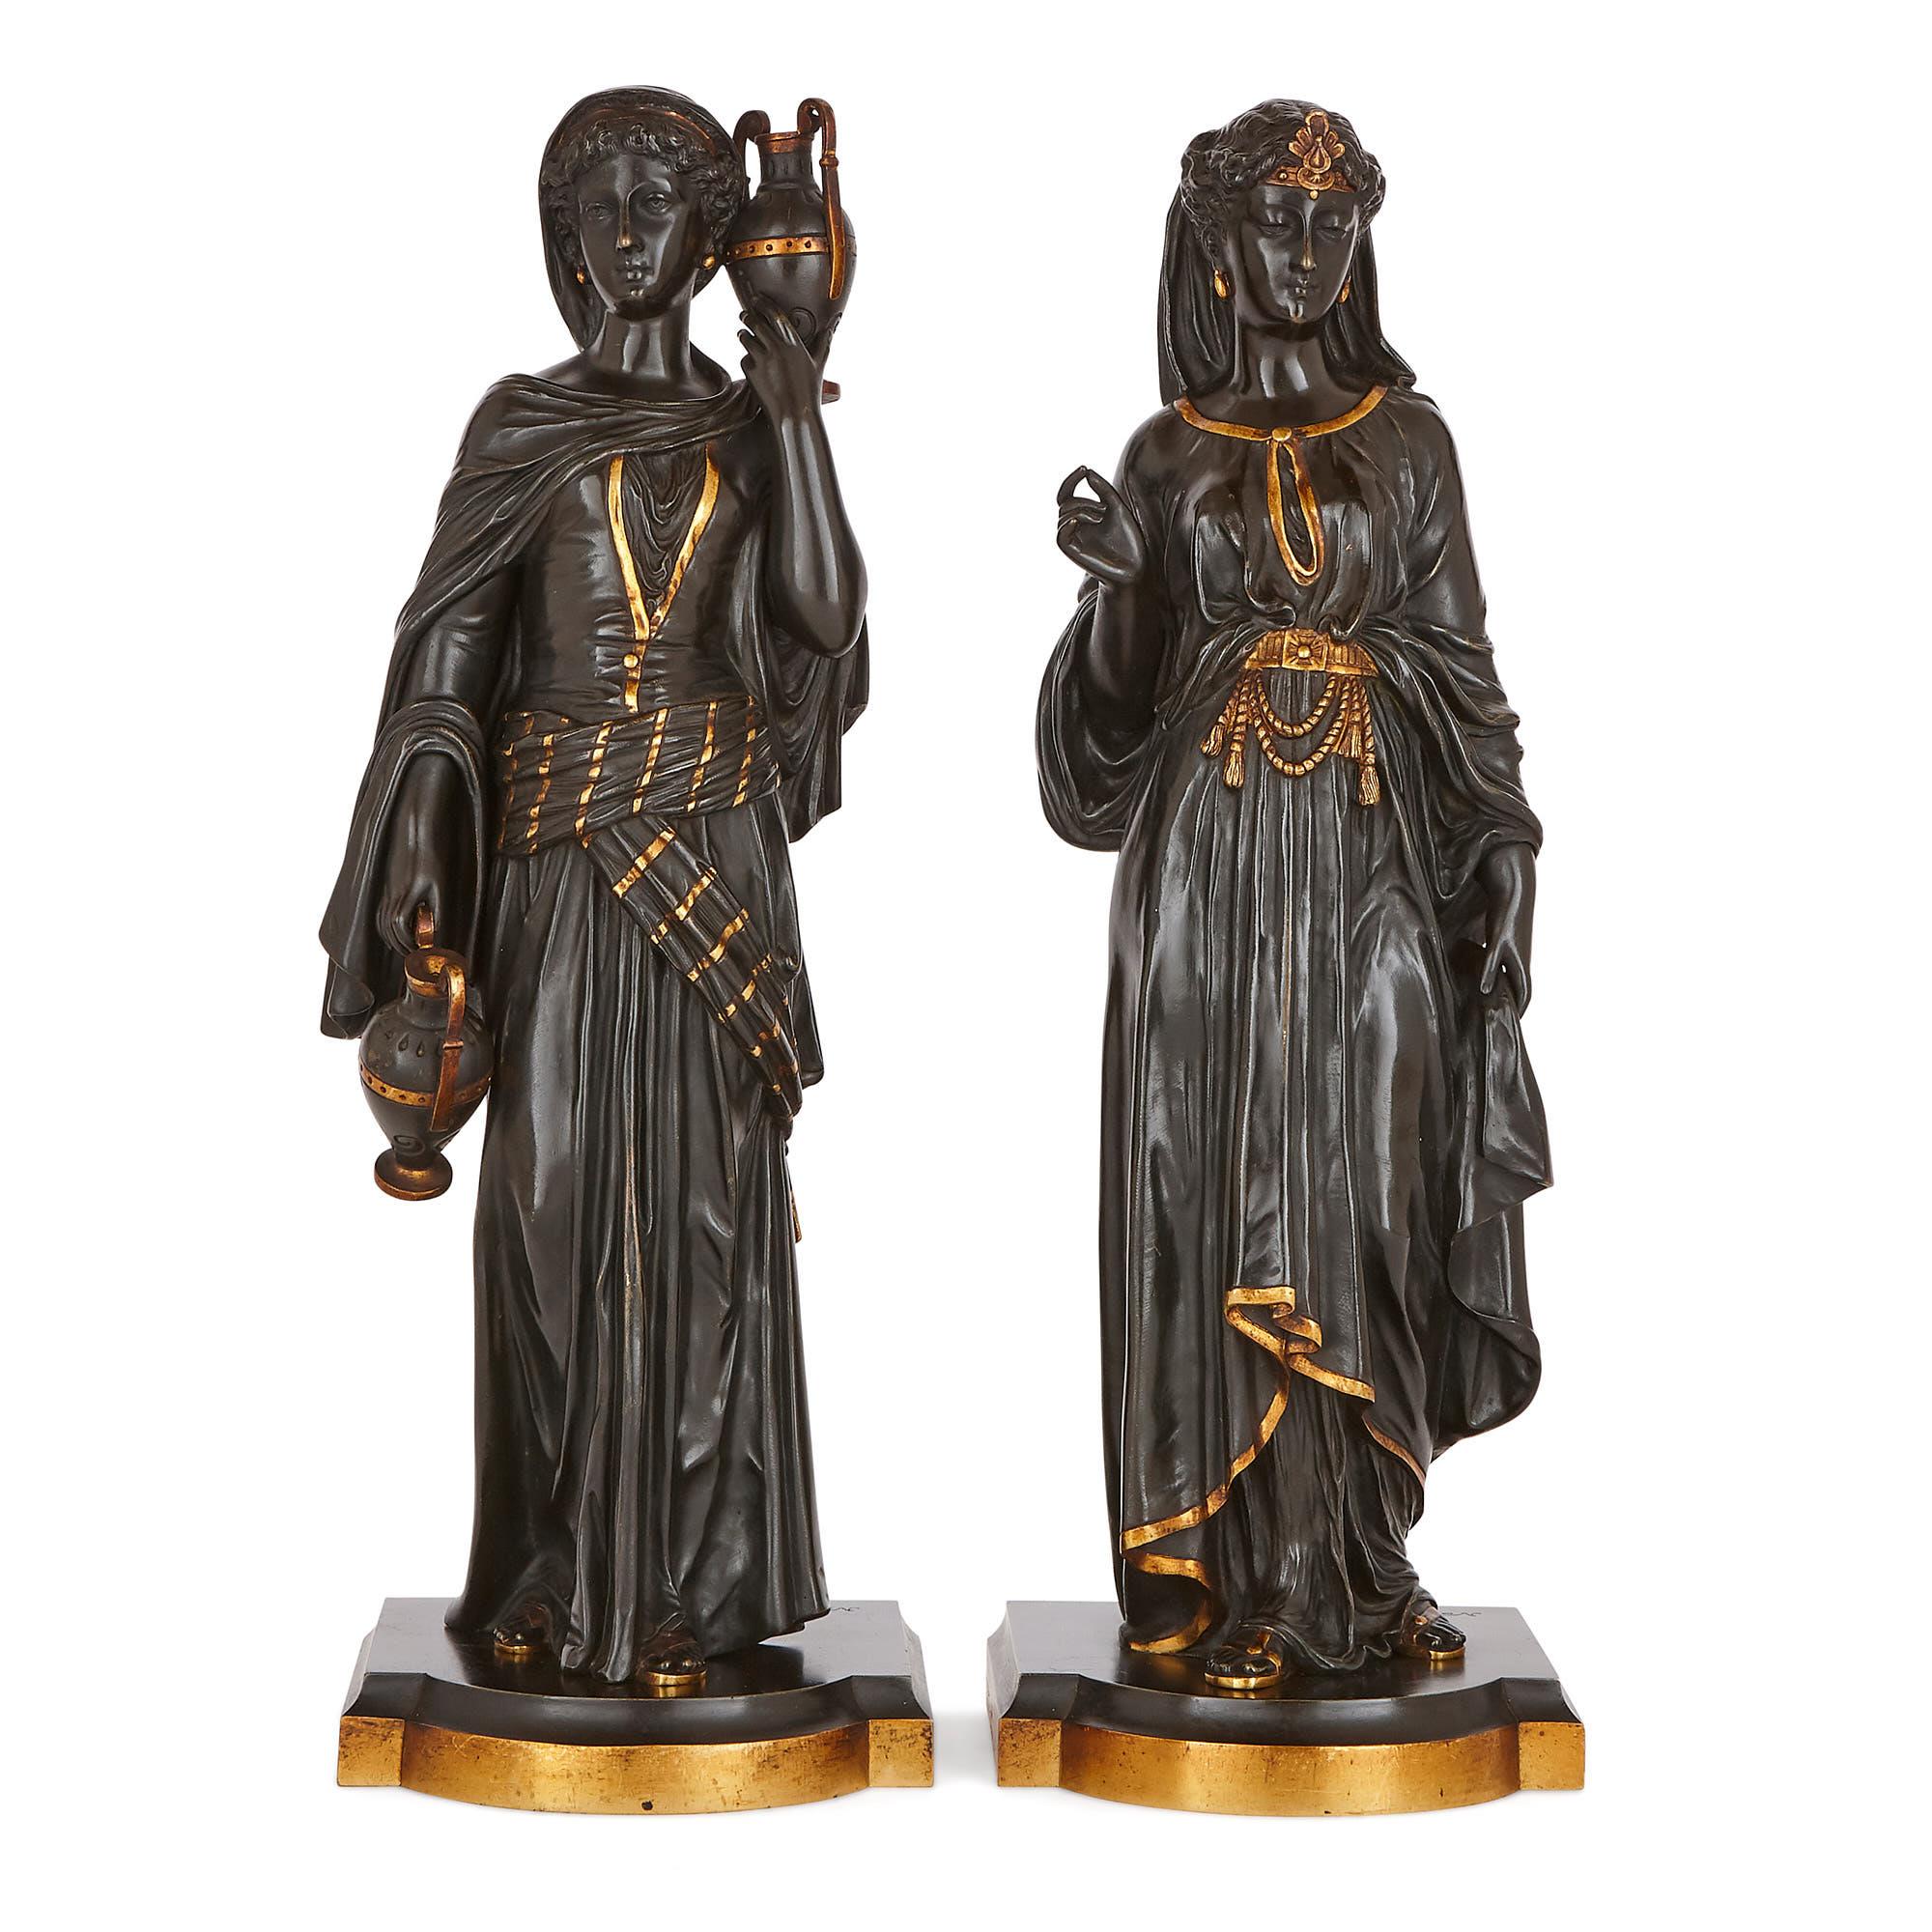 These beautiful sculptures were crafted in Austria in the early 20th century. They are signed, ‘Nam Greb’, after the famous ‘Bergman’ Viennese bronze foundry. 

Cast in the Bergman style, the Orientalist sculptures depict two women in Egyptian